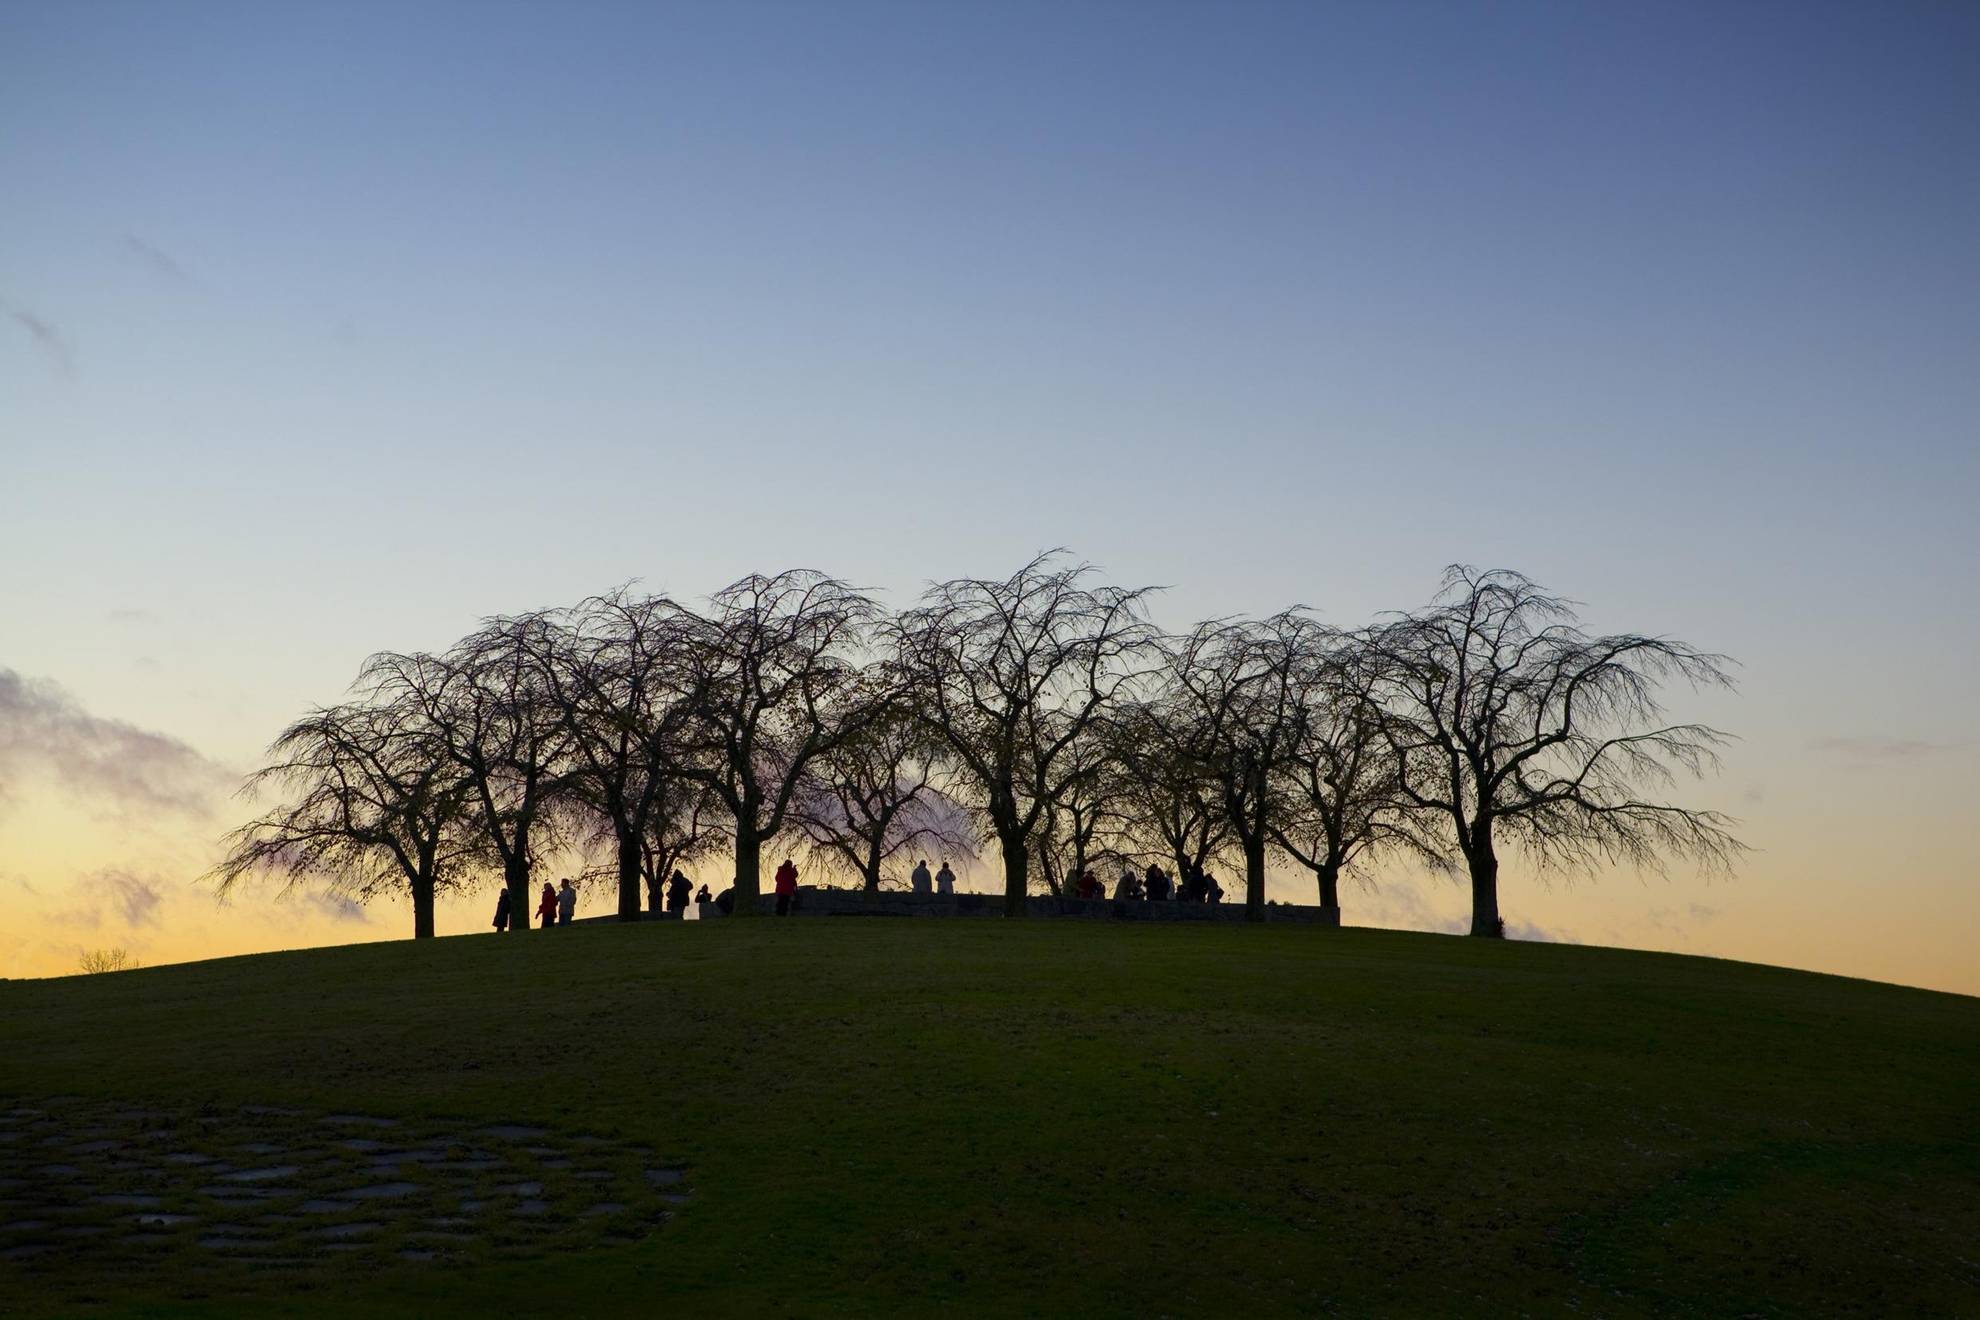 People are standing under the elm trees at Skogskyrkogården cemetery's meditation grove at sunset.